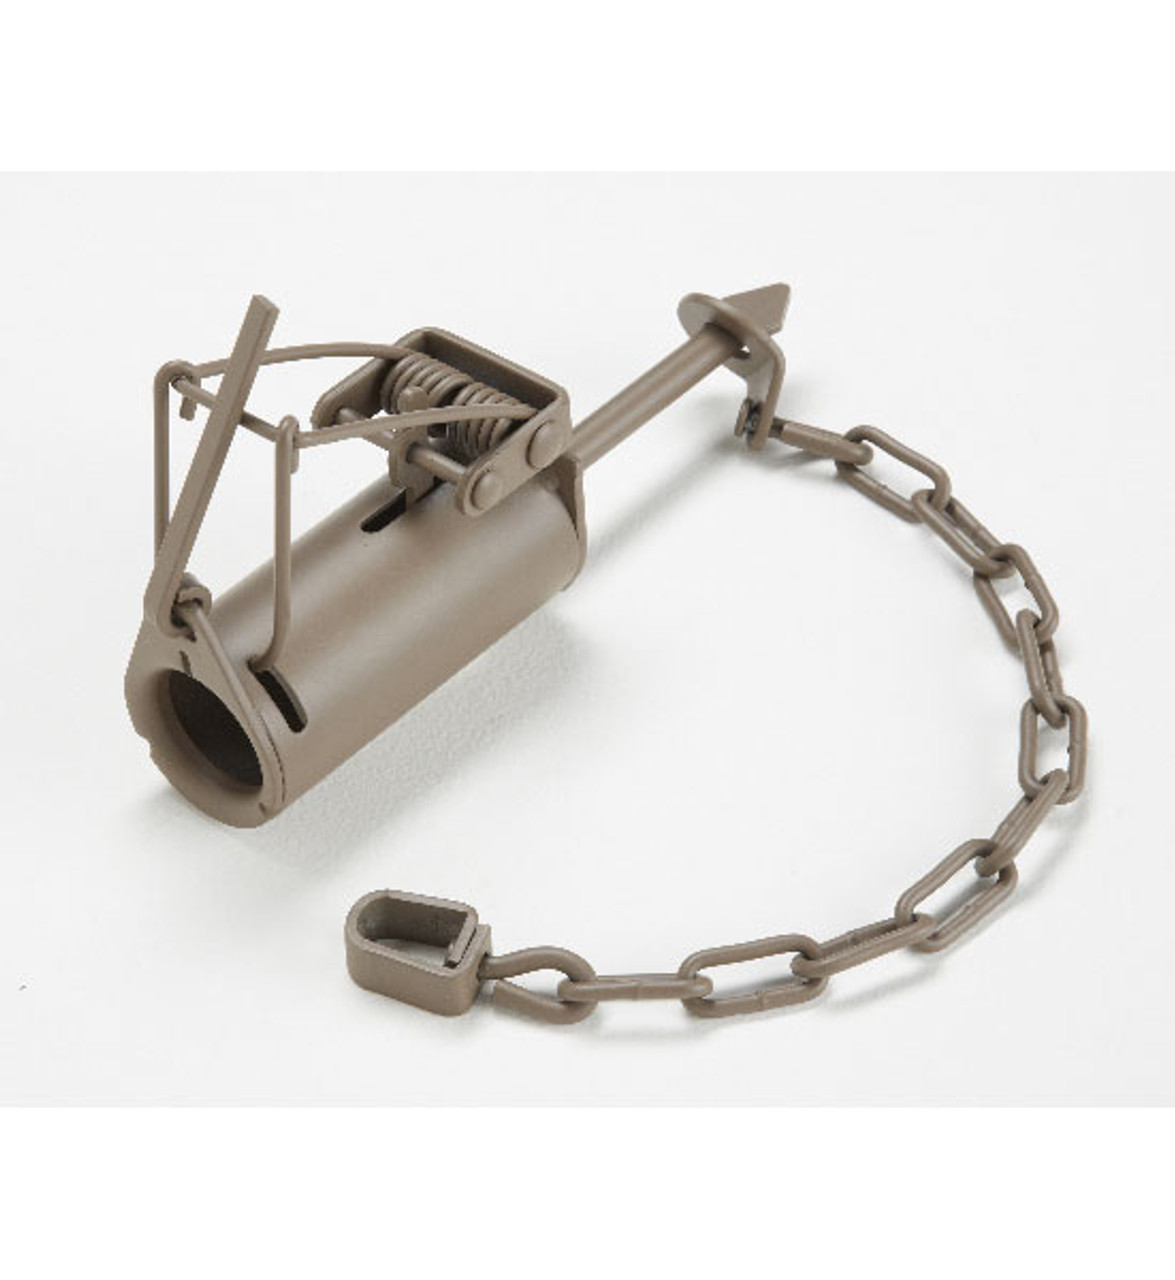 Duke Dog Proof Raccoon Trap - DP Traps - Great for Nuisance Coons - 12 Traps